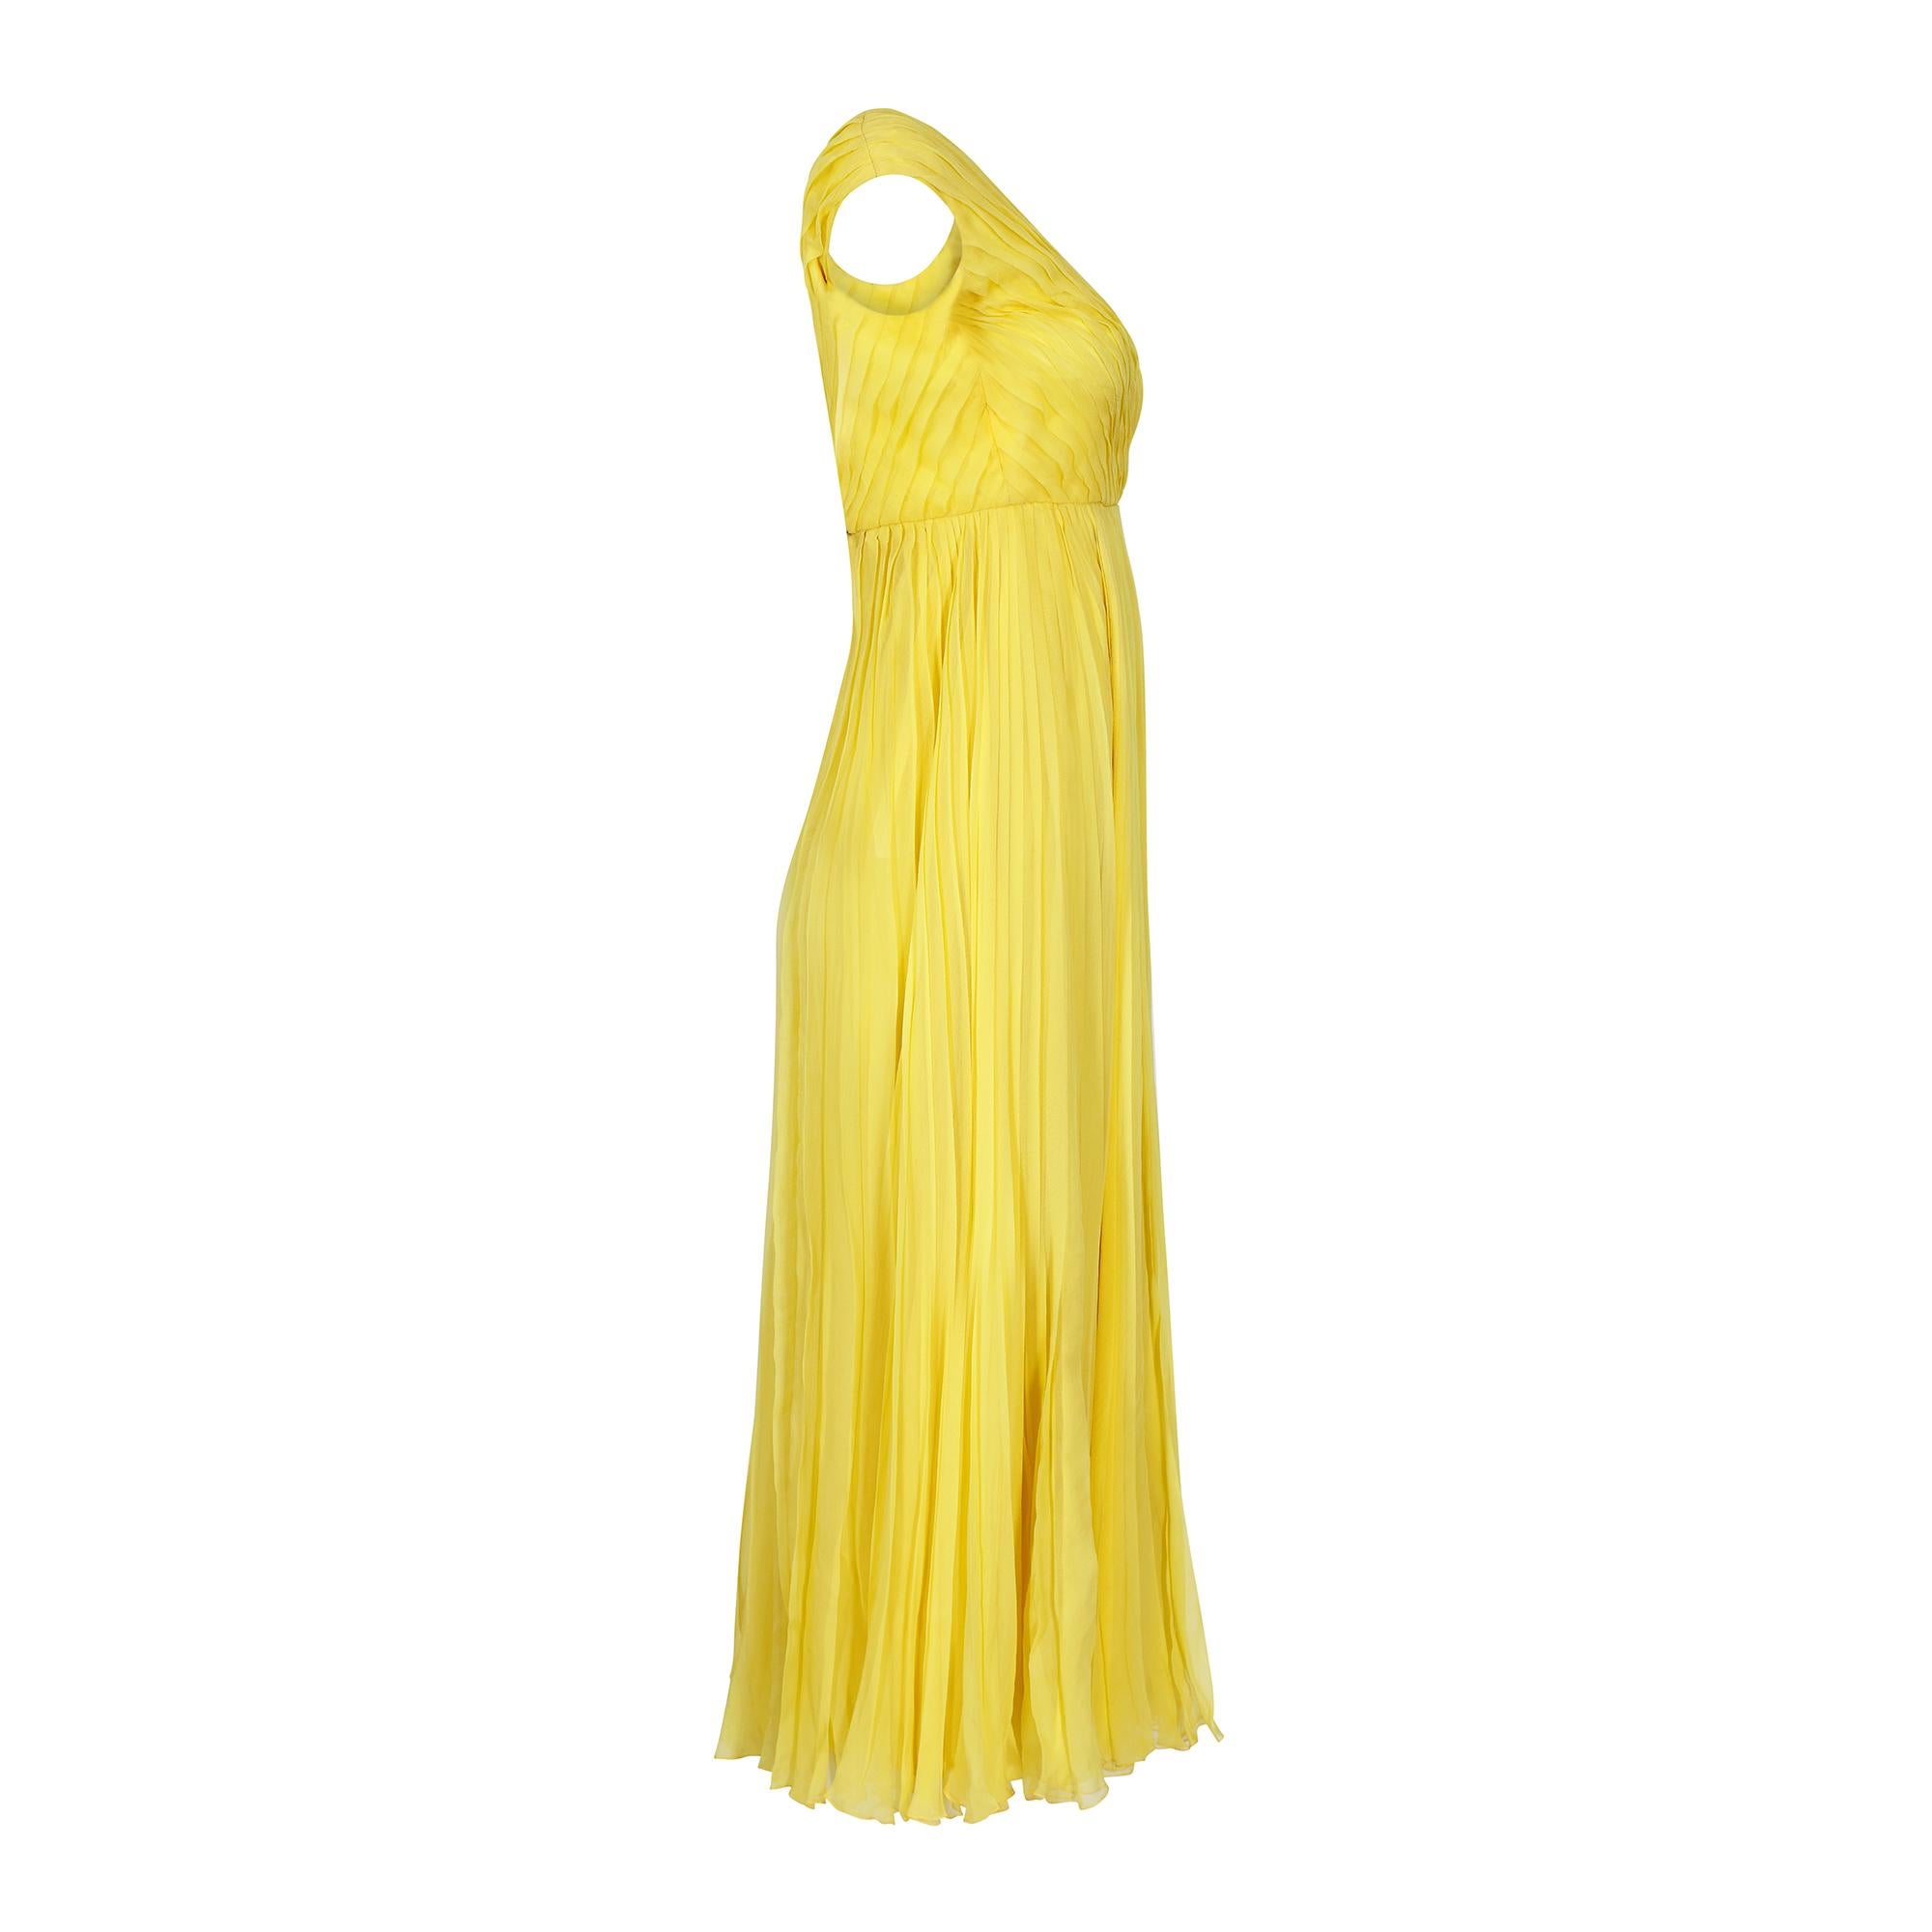 Few can claim to share the standards of renowned French couturier Ted Lapidus. This dress is made of a yellow silk crepe with the most superbly executed knife pleats and an elegant sleeveless deep V neck design with a high empire waist. This